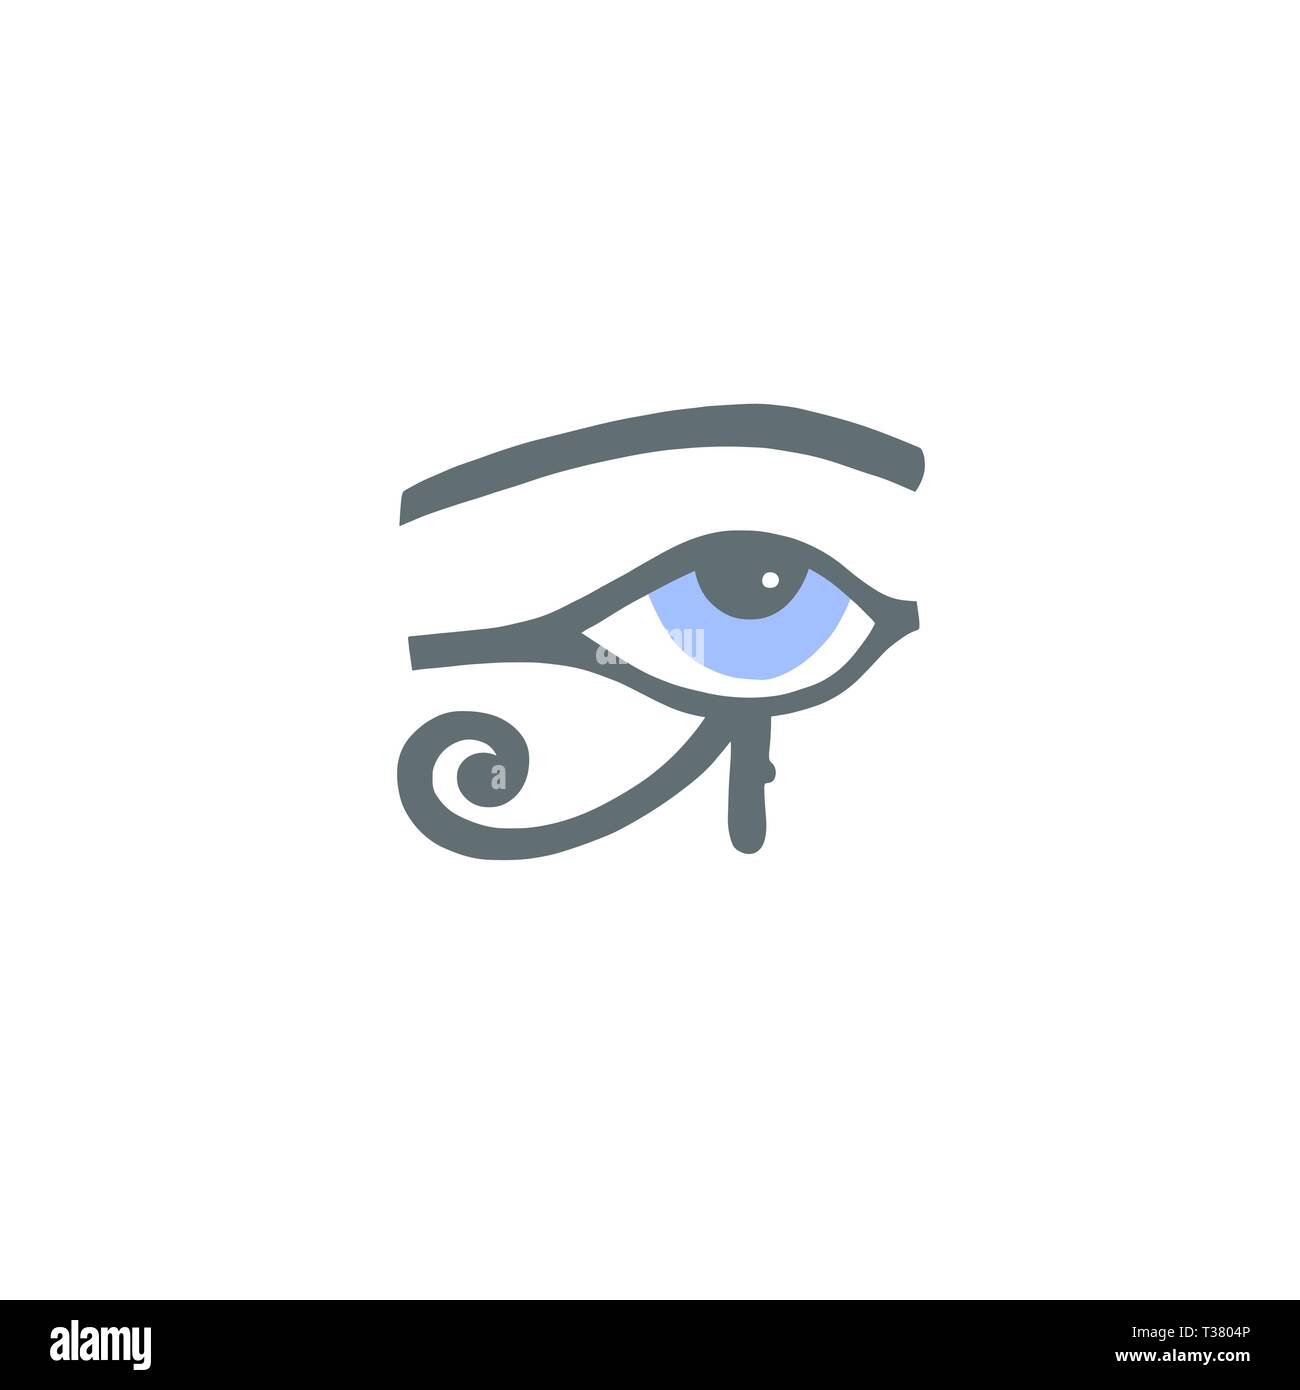 Egyptian hieroglyph eye of ra or the eye of horus have healing and protective powers, vector illustration Stock Vector